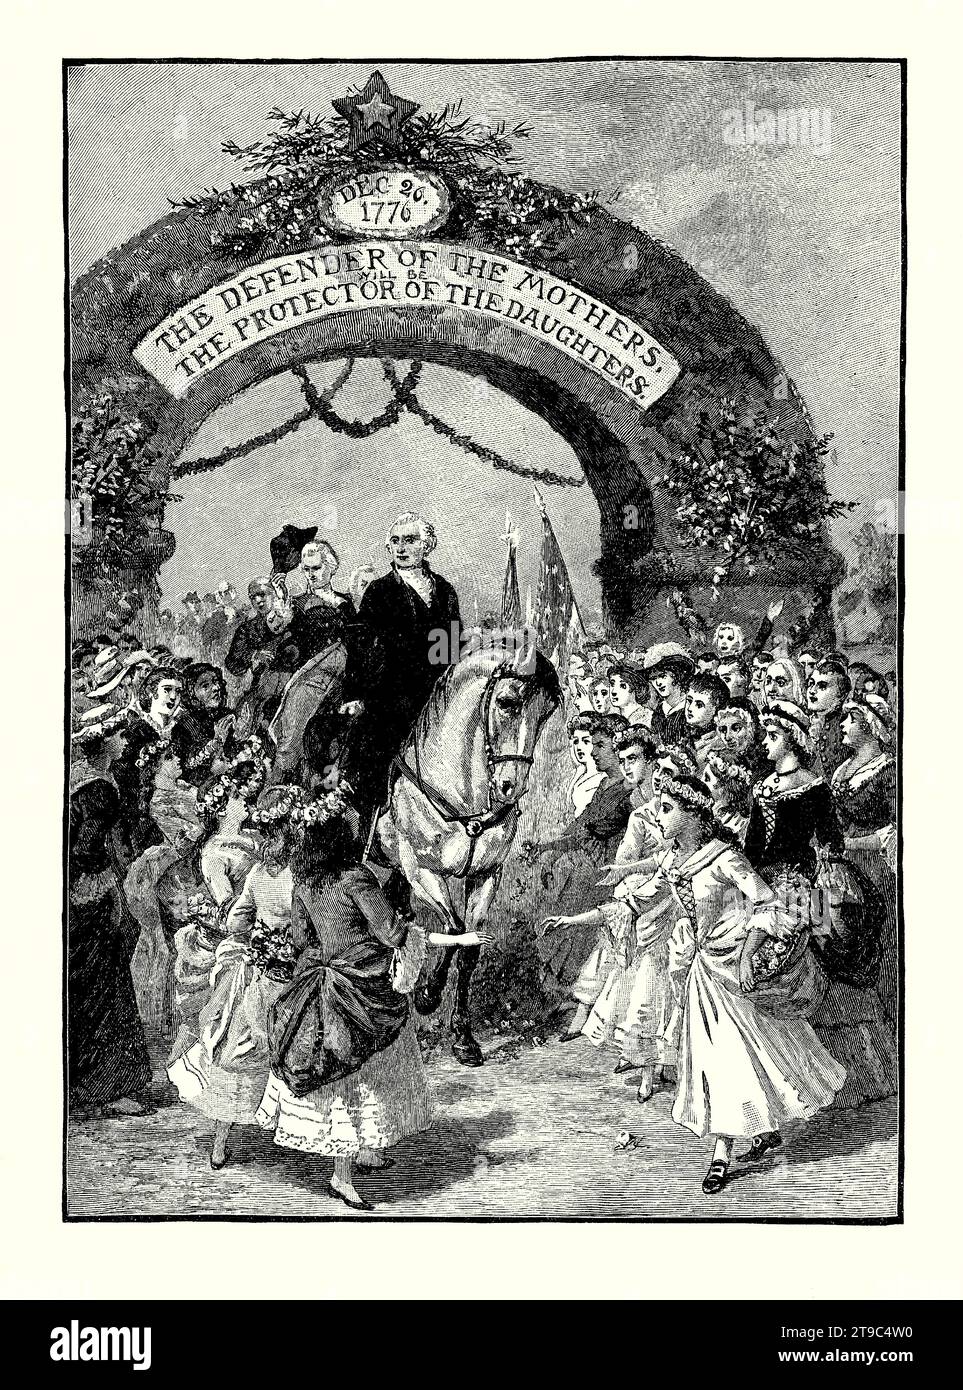 An old engraving of George Washington’s entrance through the Triumphal Arch erected by the citizens at Trenton, New Jersey, USA on April 21 1789. It is from an American history book of 1895. On April 14 Washington learned he was elected the first President of the United States. He left his Mount Vernon home two days later on his way to New York City for his inauguration. On the way, he travelled through many towns and cities where he was met with similar celebrations. Stock Photo